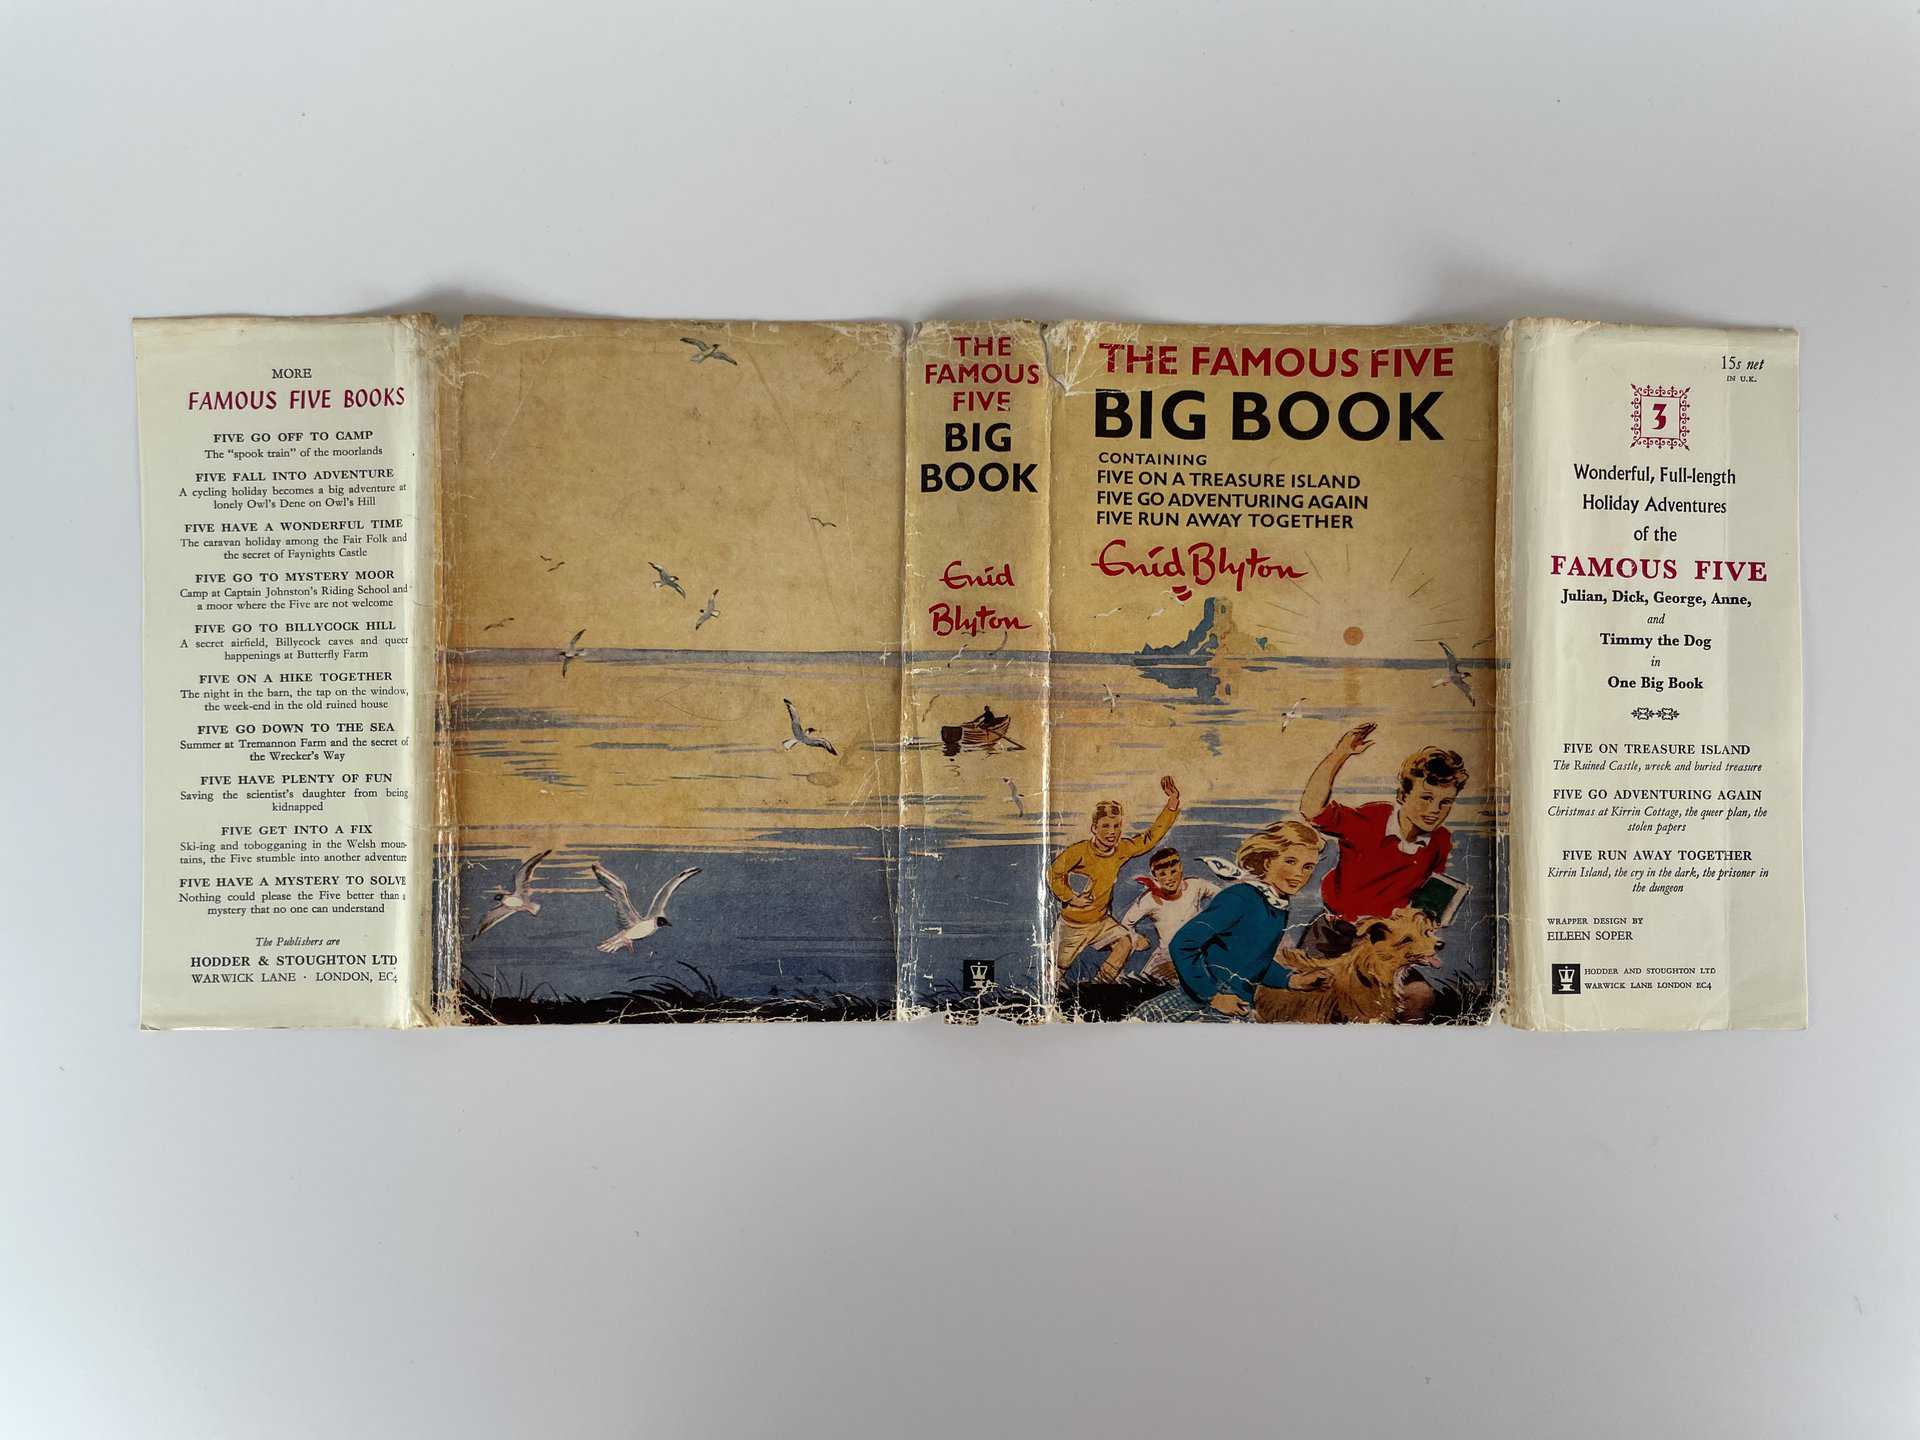 enid blyton the famous five big book firstedi4